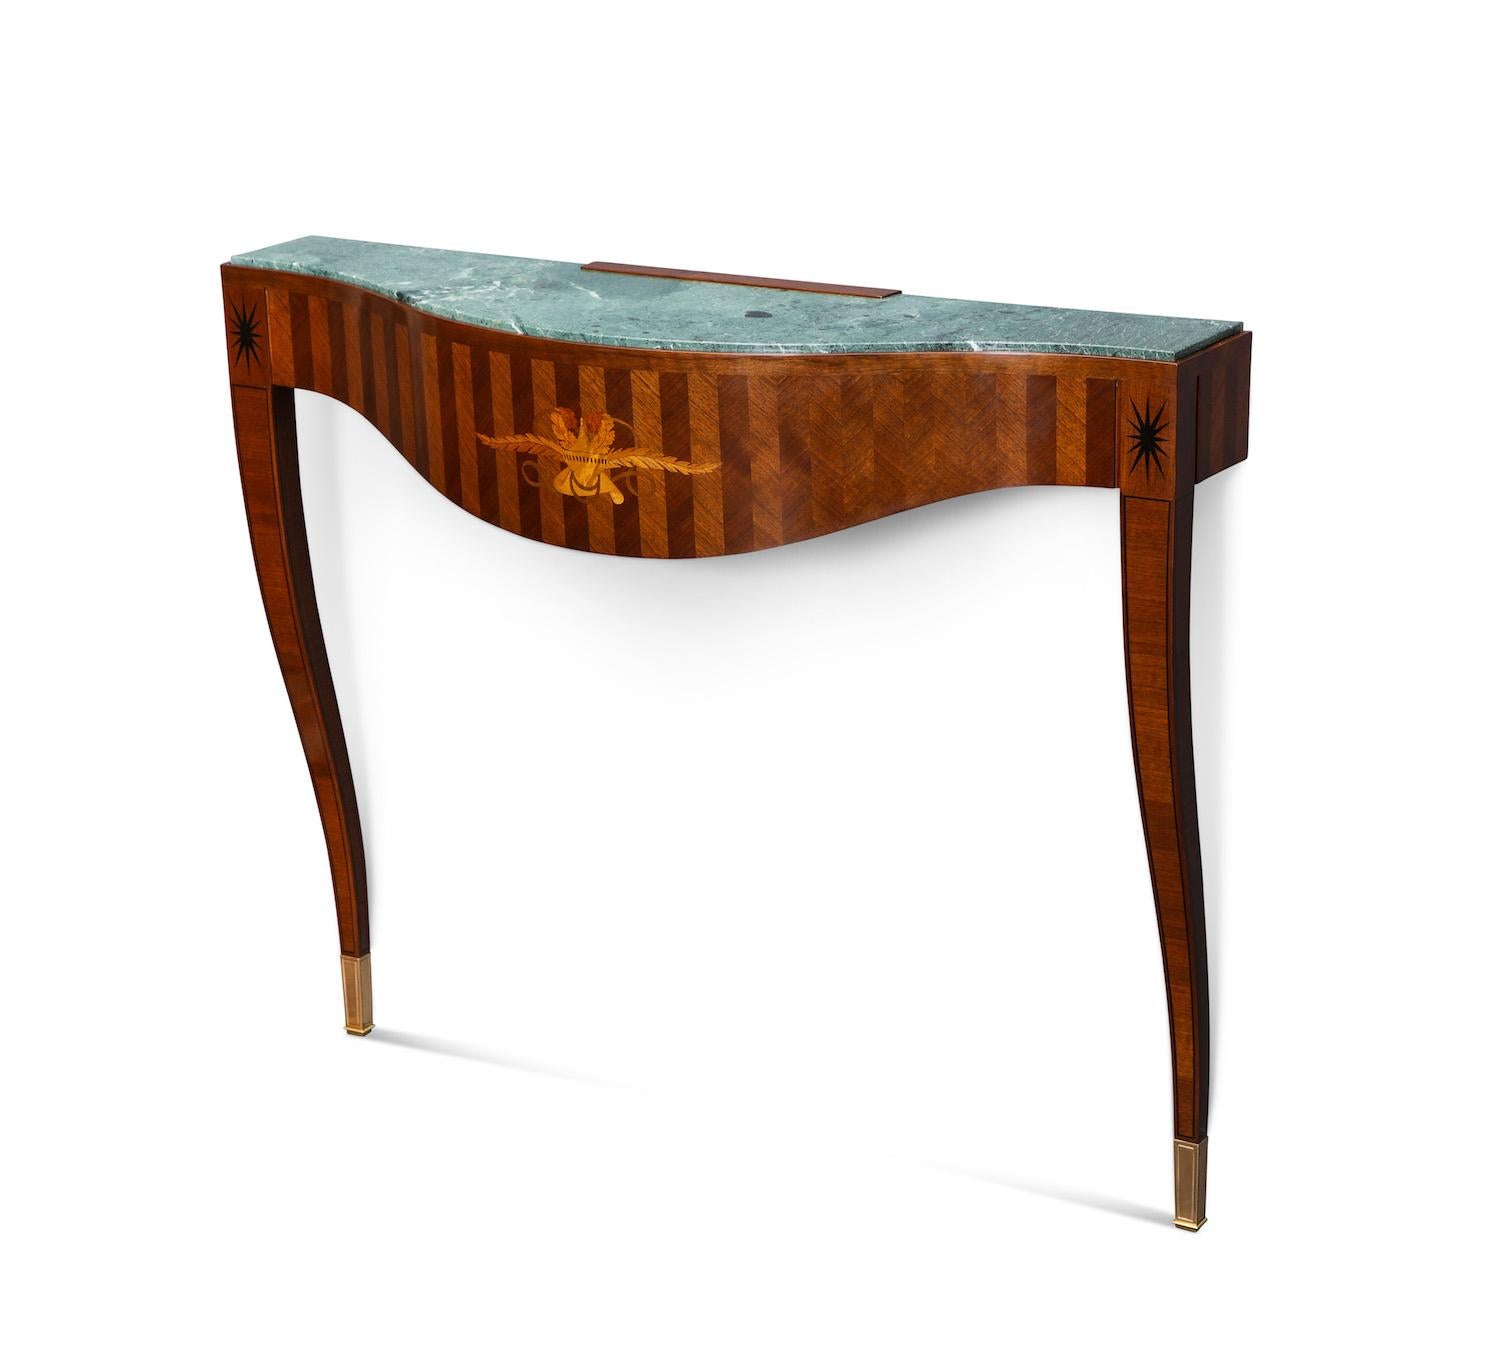 Paolo Buffa wall-mounted, bow front console table with inset marble top. Wood inlaid veneer in a classical motif apron above brass-mounted feet.  This piece has been authenticated by the Paolo Buffa Archives.